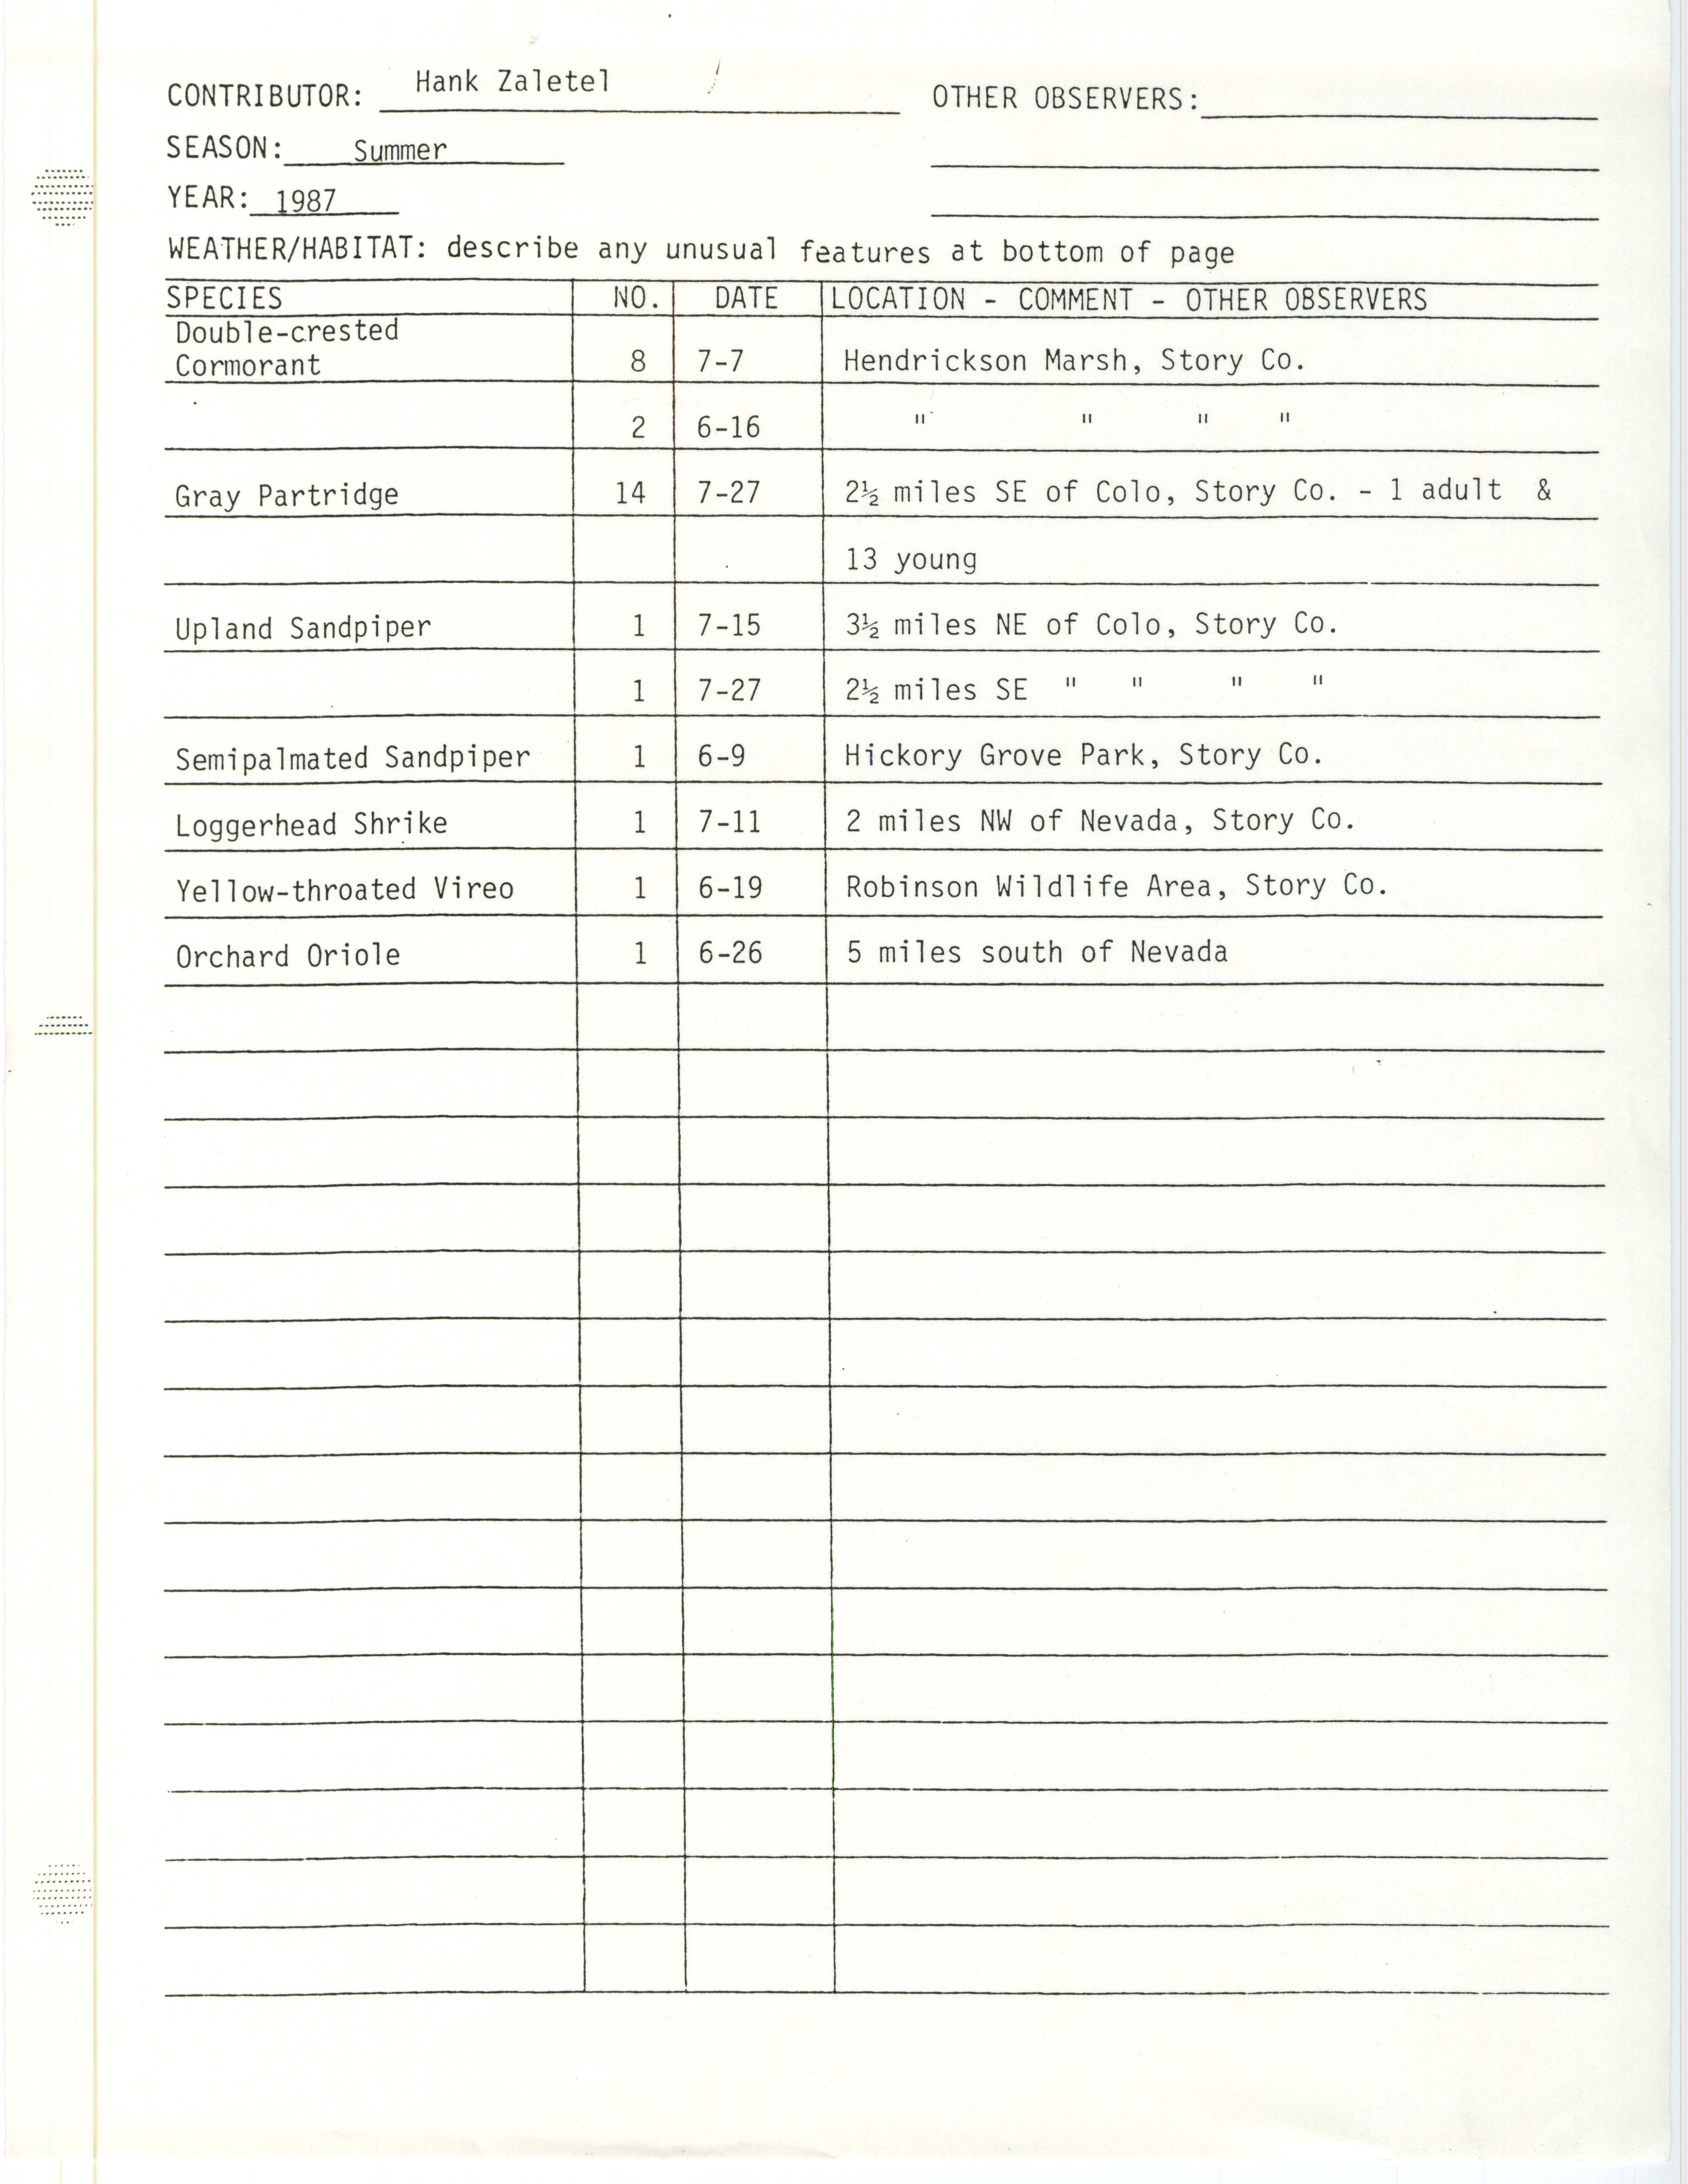 Field notes contributed by Hank Zaletel, summer 1987